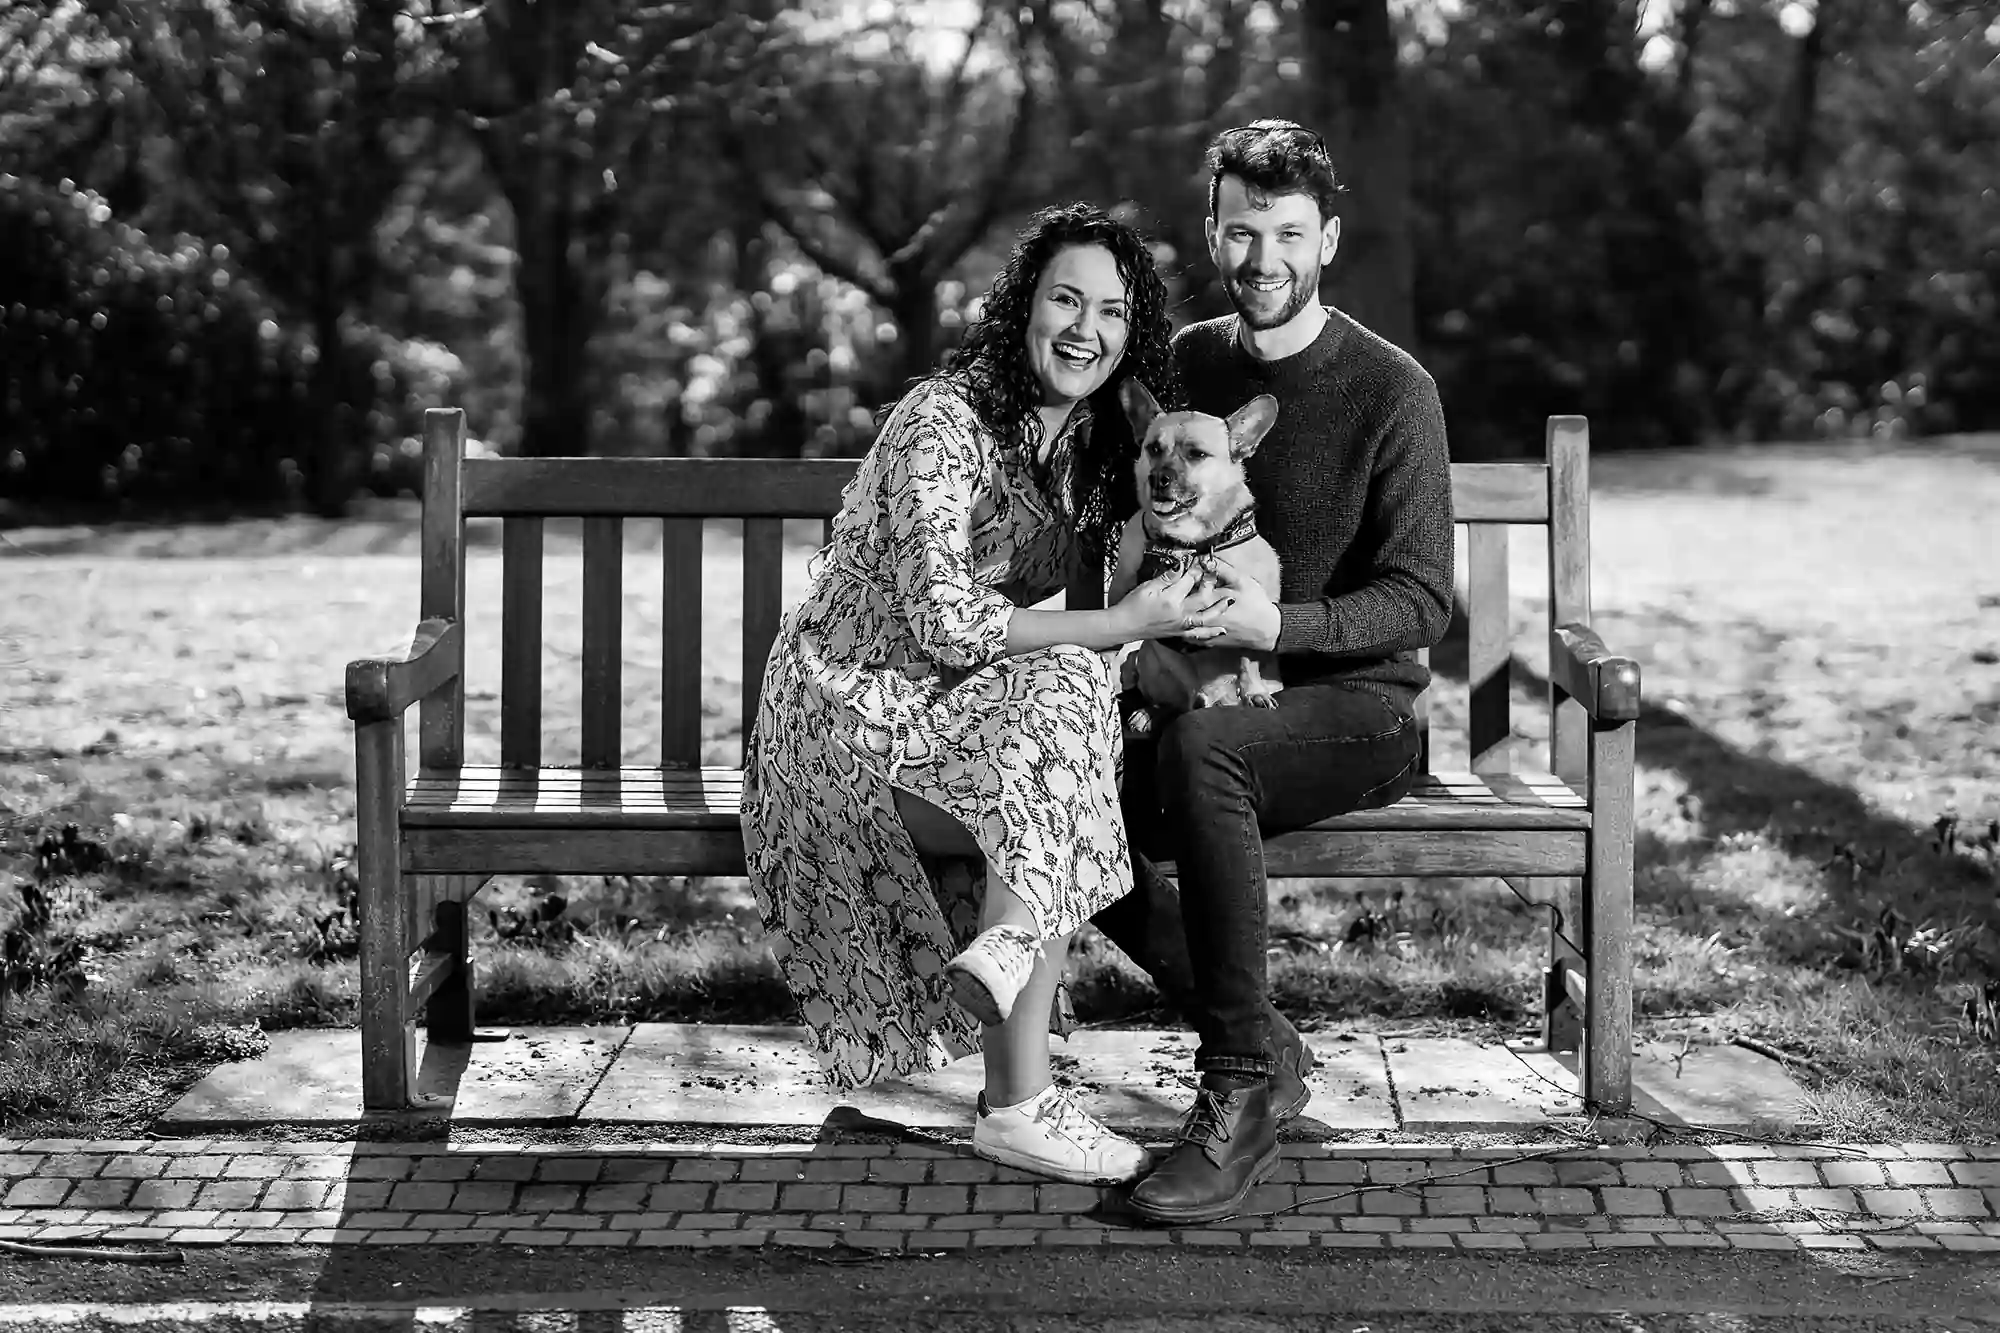 A happy couple and their dog sitting on a park bench, smiling towards the camera in a sunny, tree-lined setting.